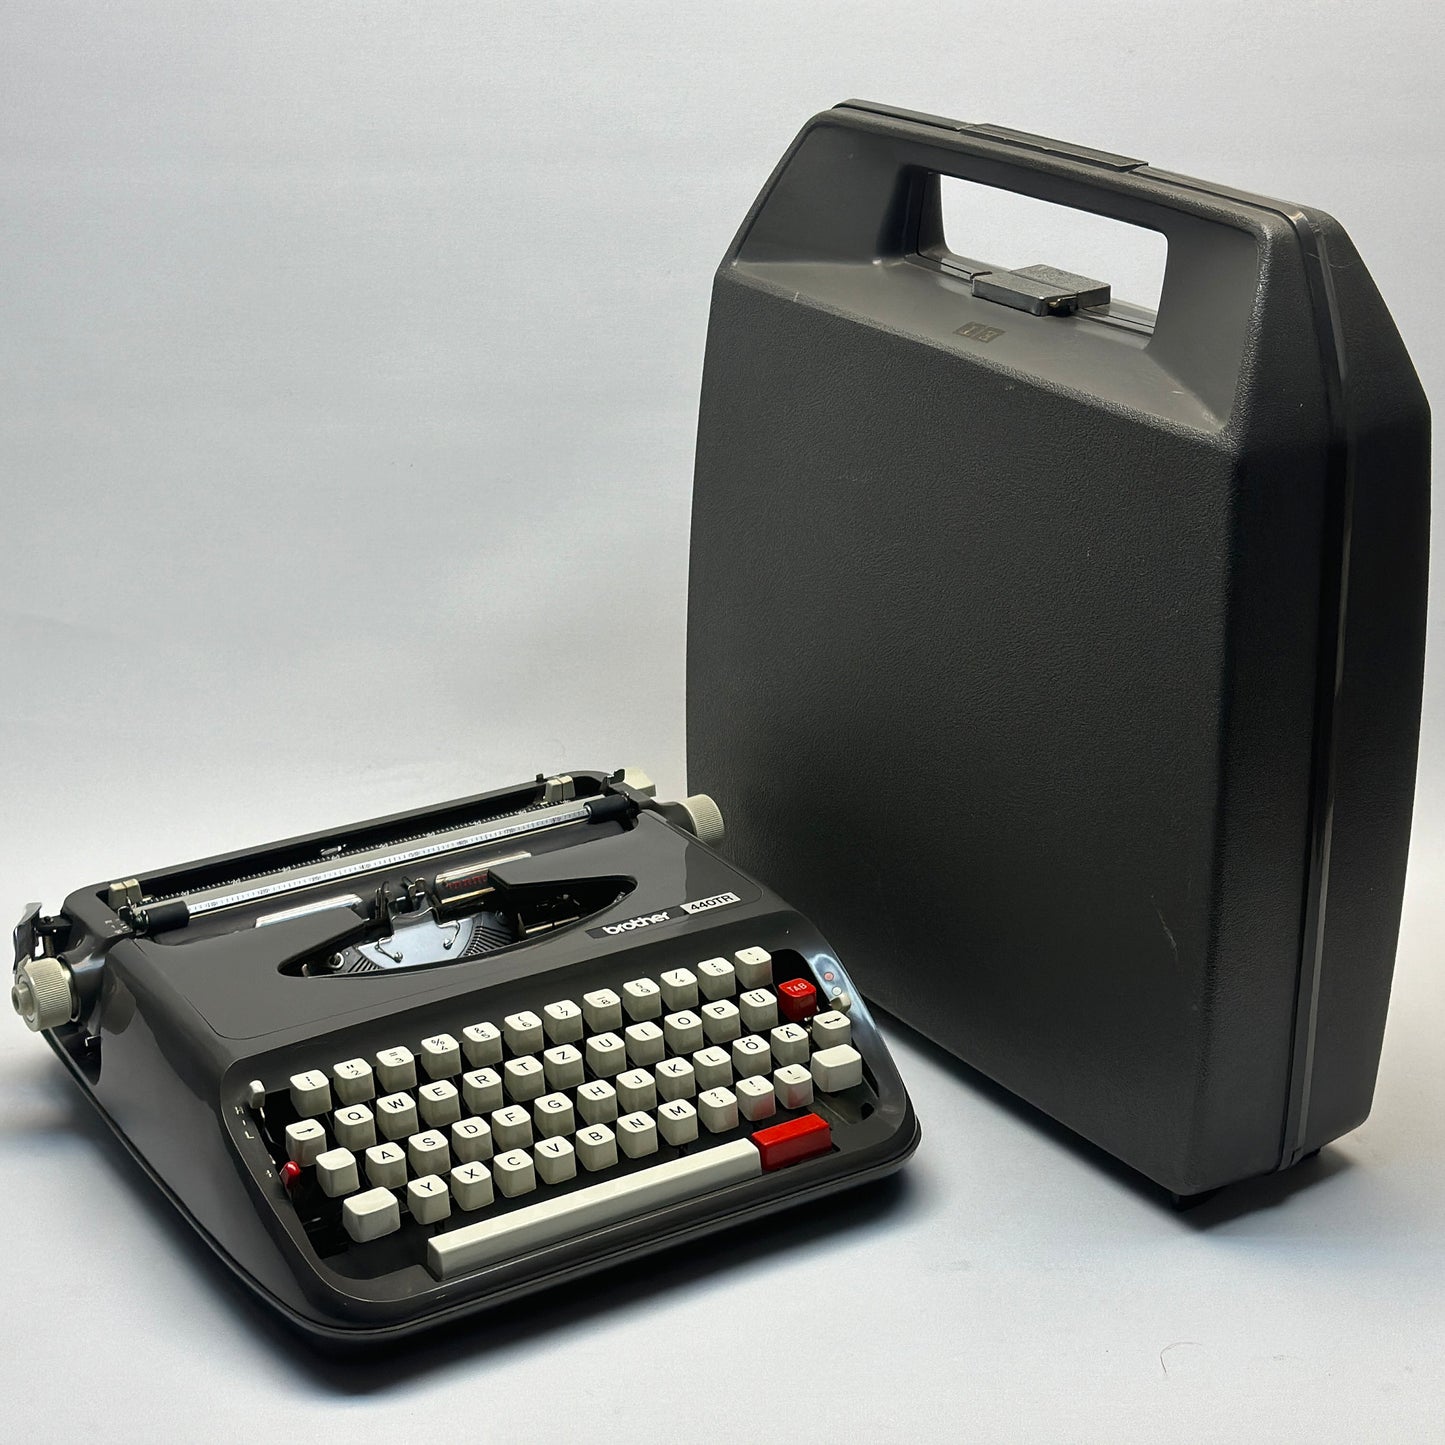 Step Back in Time with the Brother 440 TR Model Typewriter - Classic Black Design, QWERTZ and White Keyboards, Antique Gift